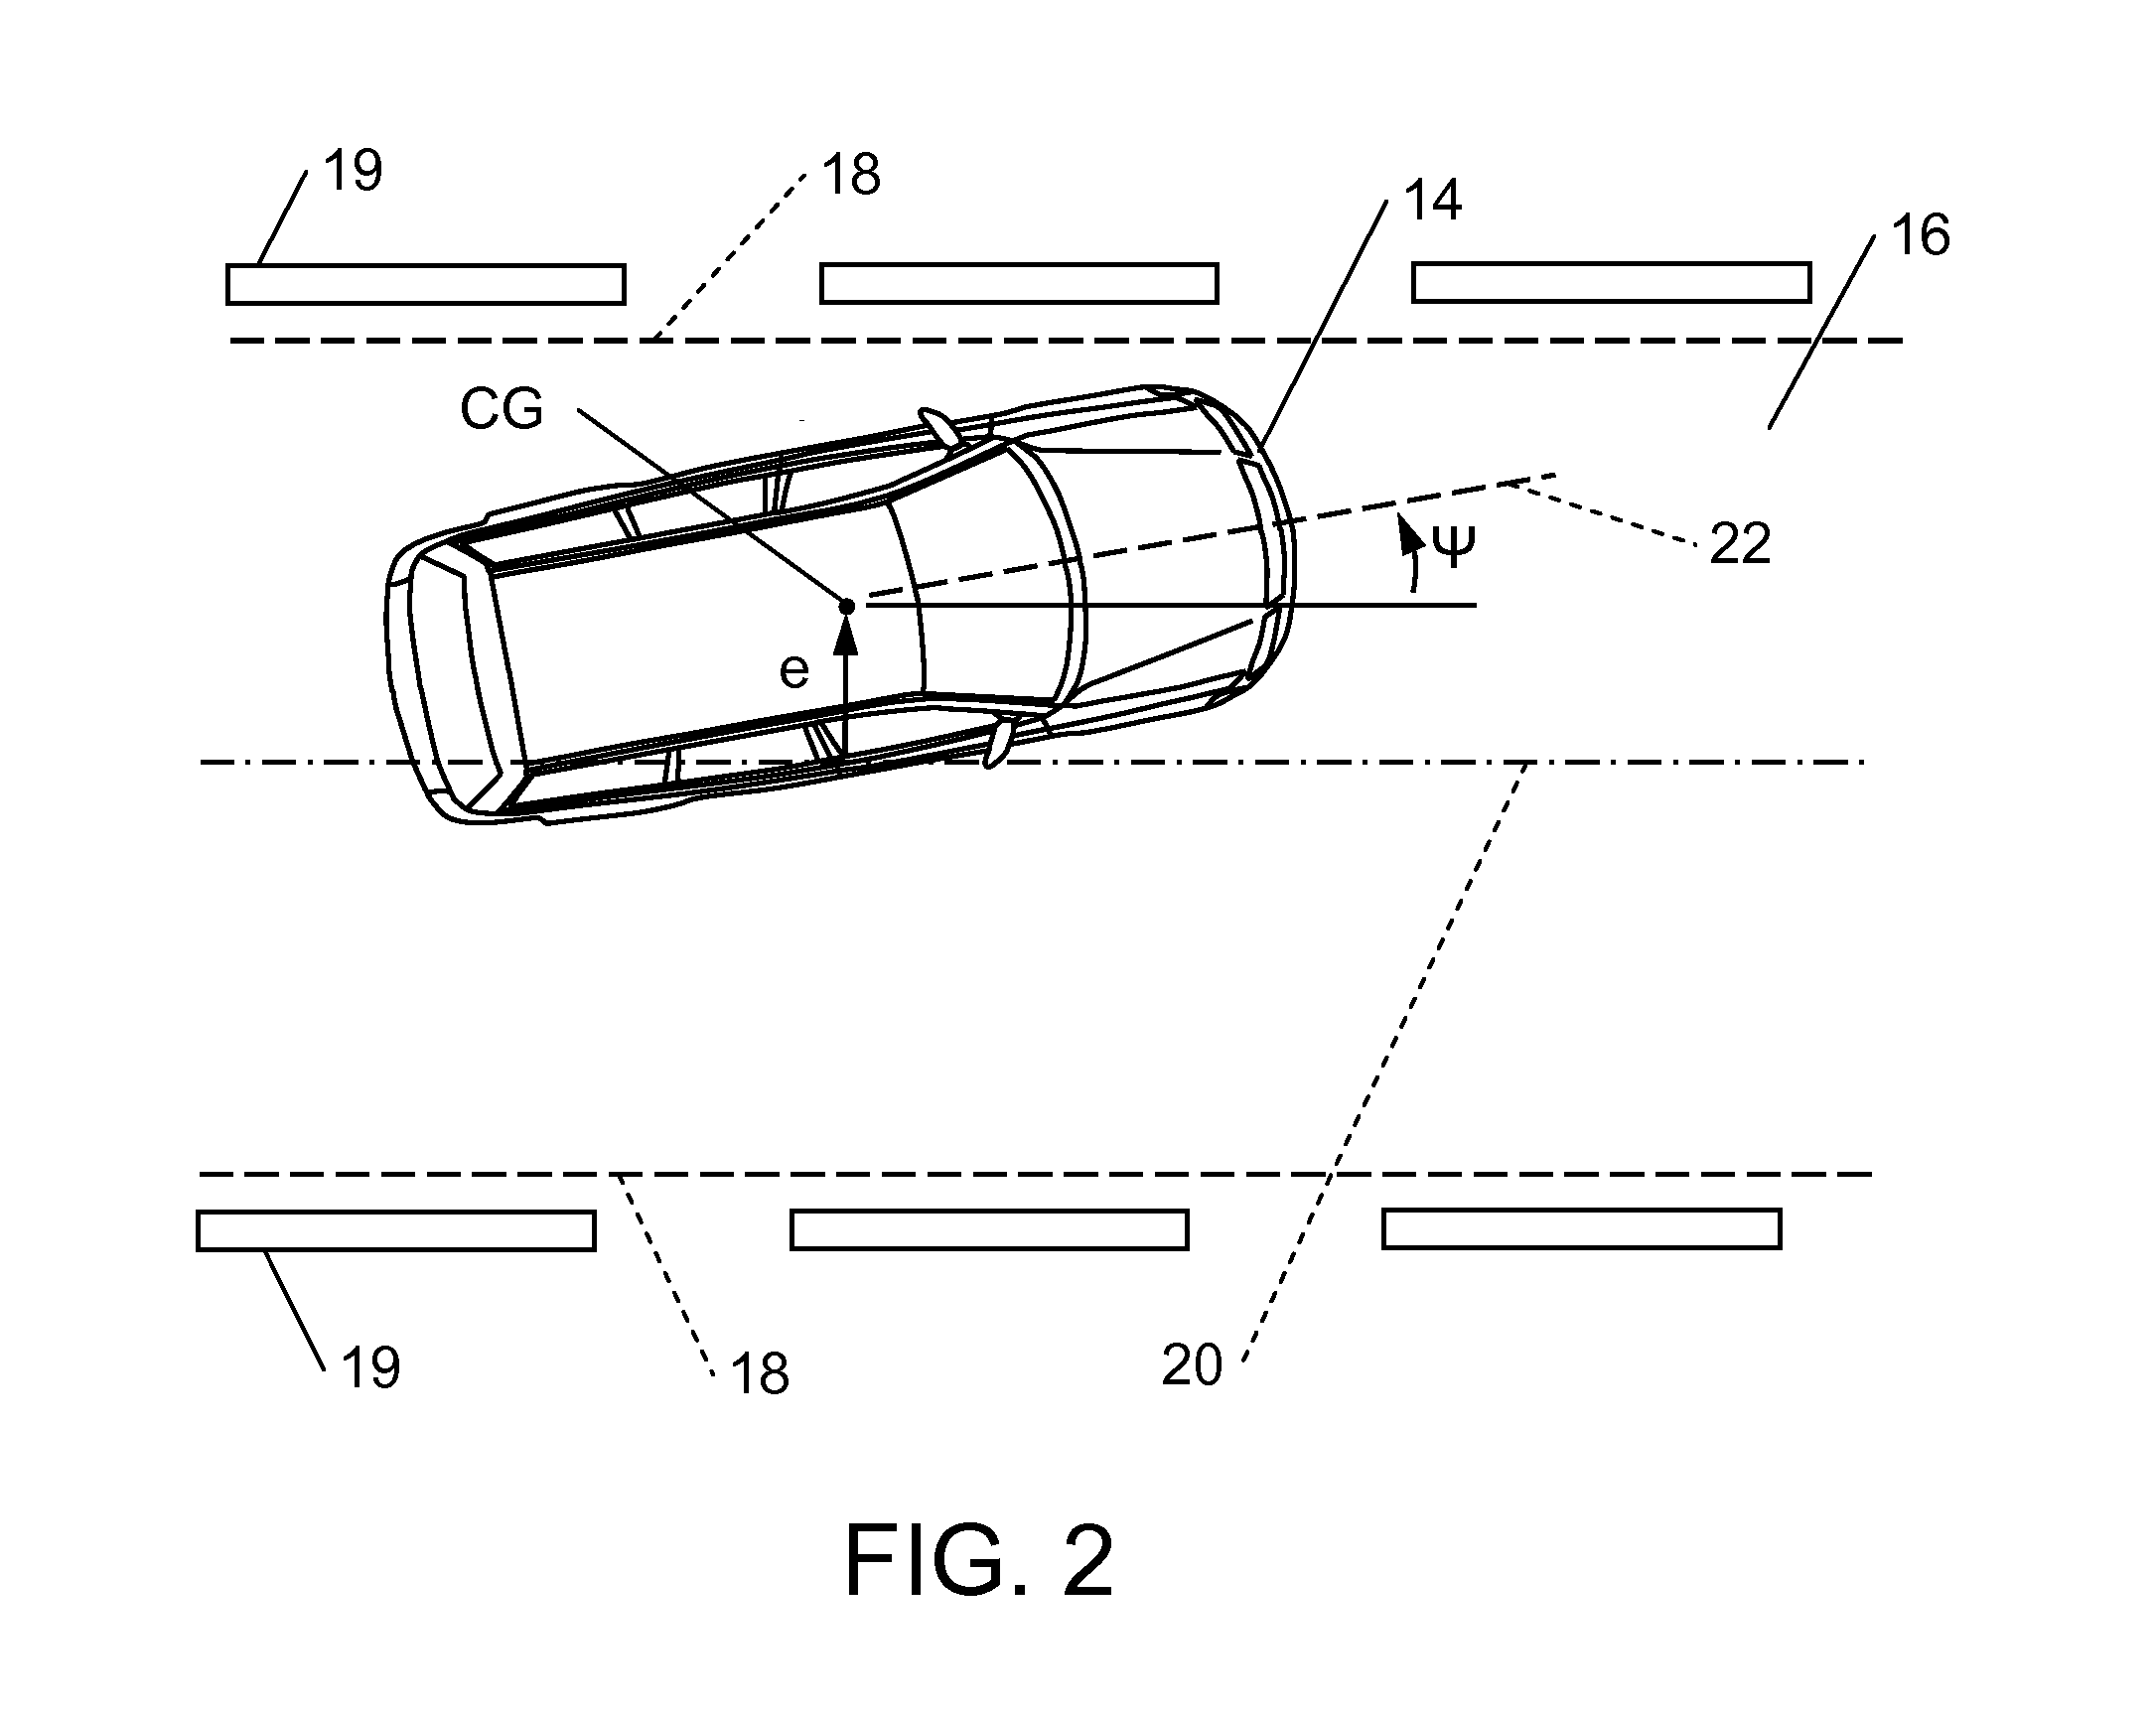 Method for Controlling Vehicle Dynamics